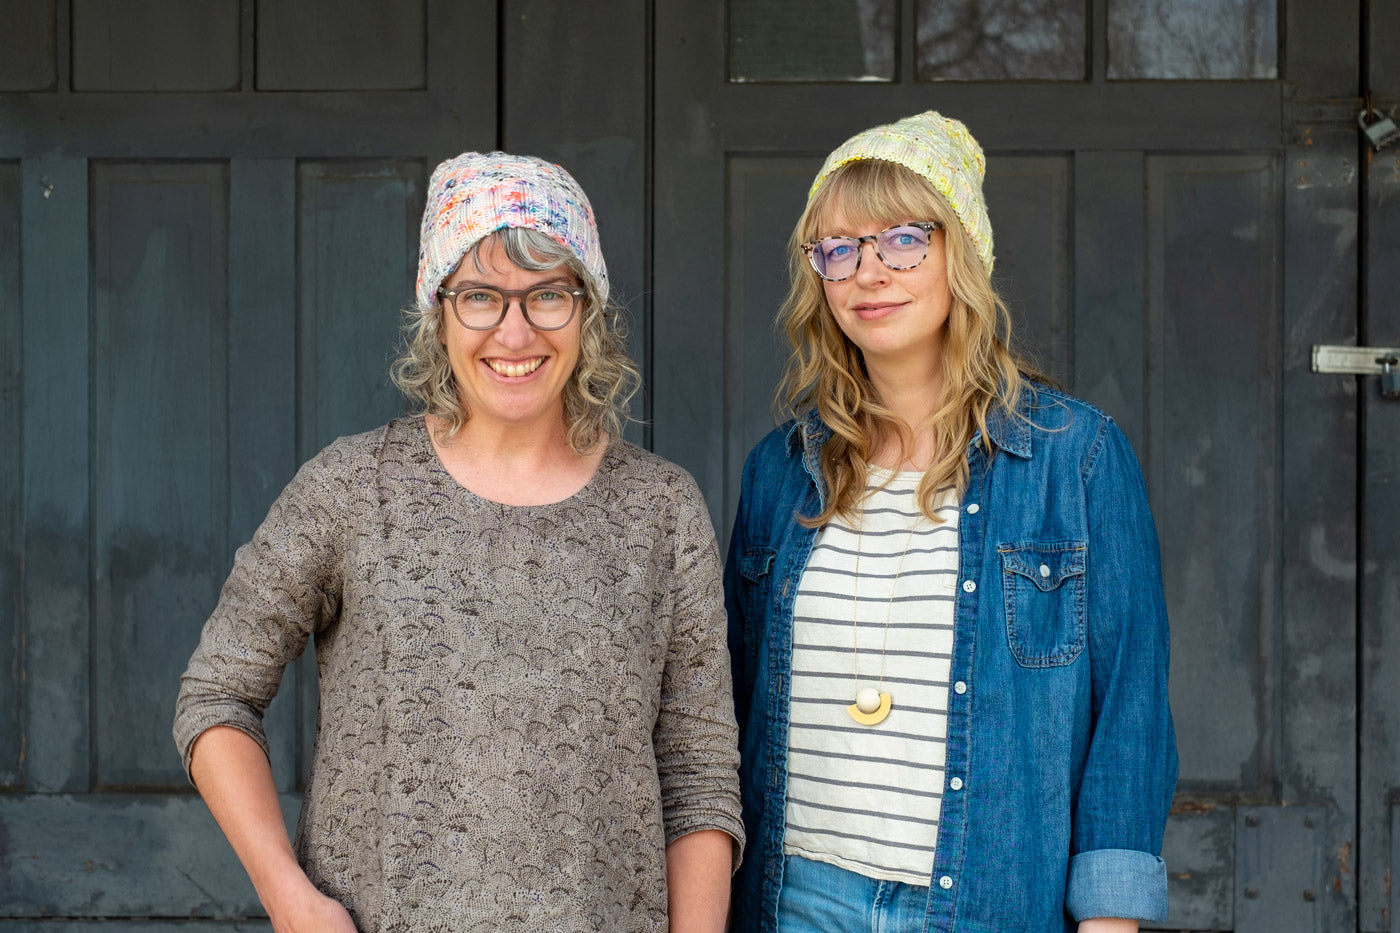 Jaime and Amber standing together, both wear handknits hats that are white with neon speckles. 